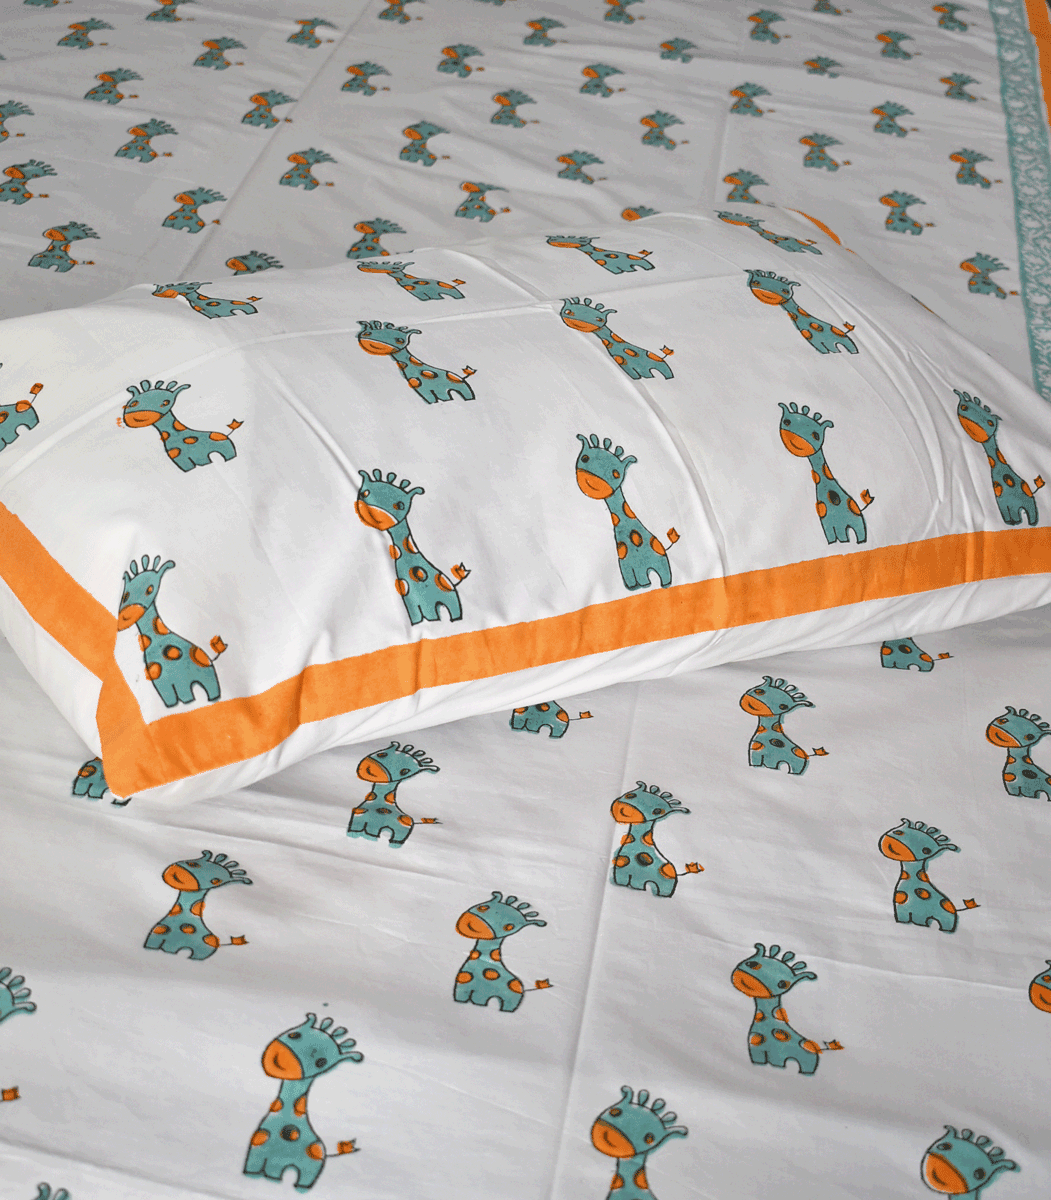 Hand block printed Percale cotton Single Bed sheet with Single ( 1 ) pillow cover for Kids room